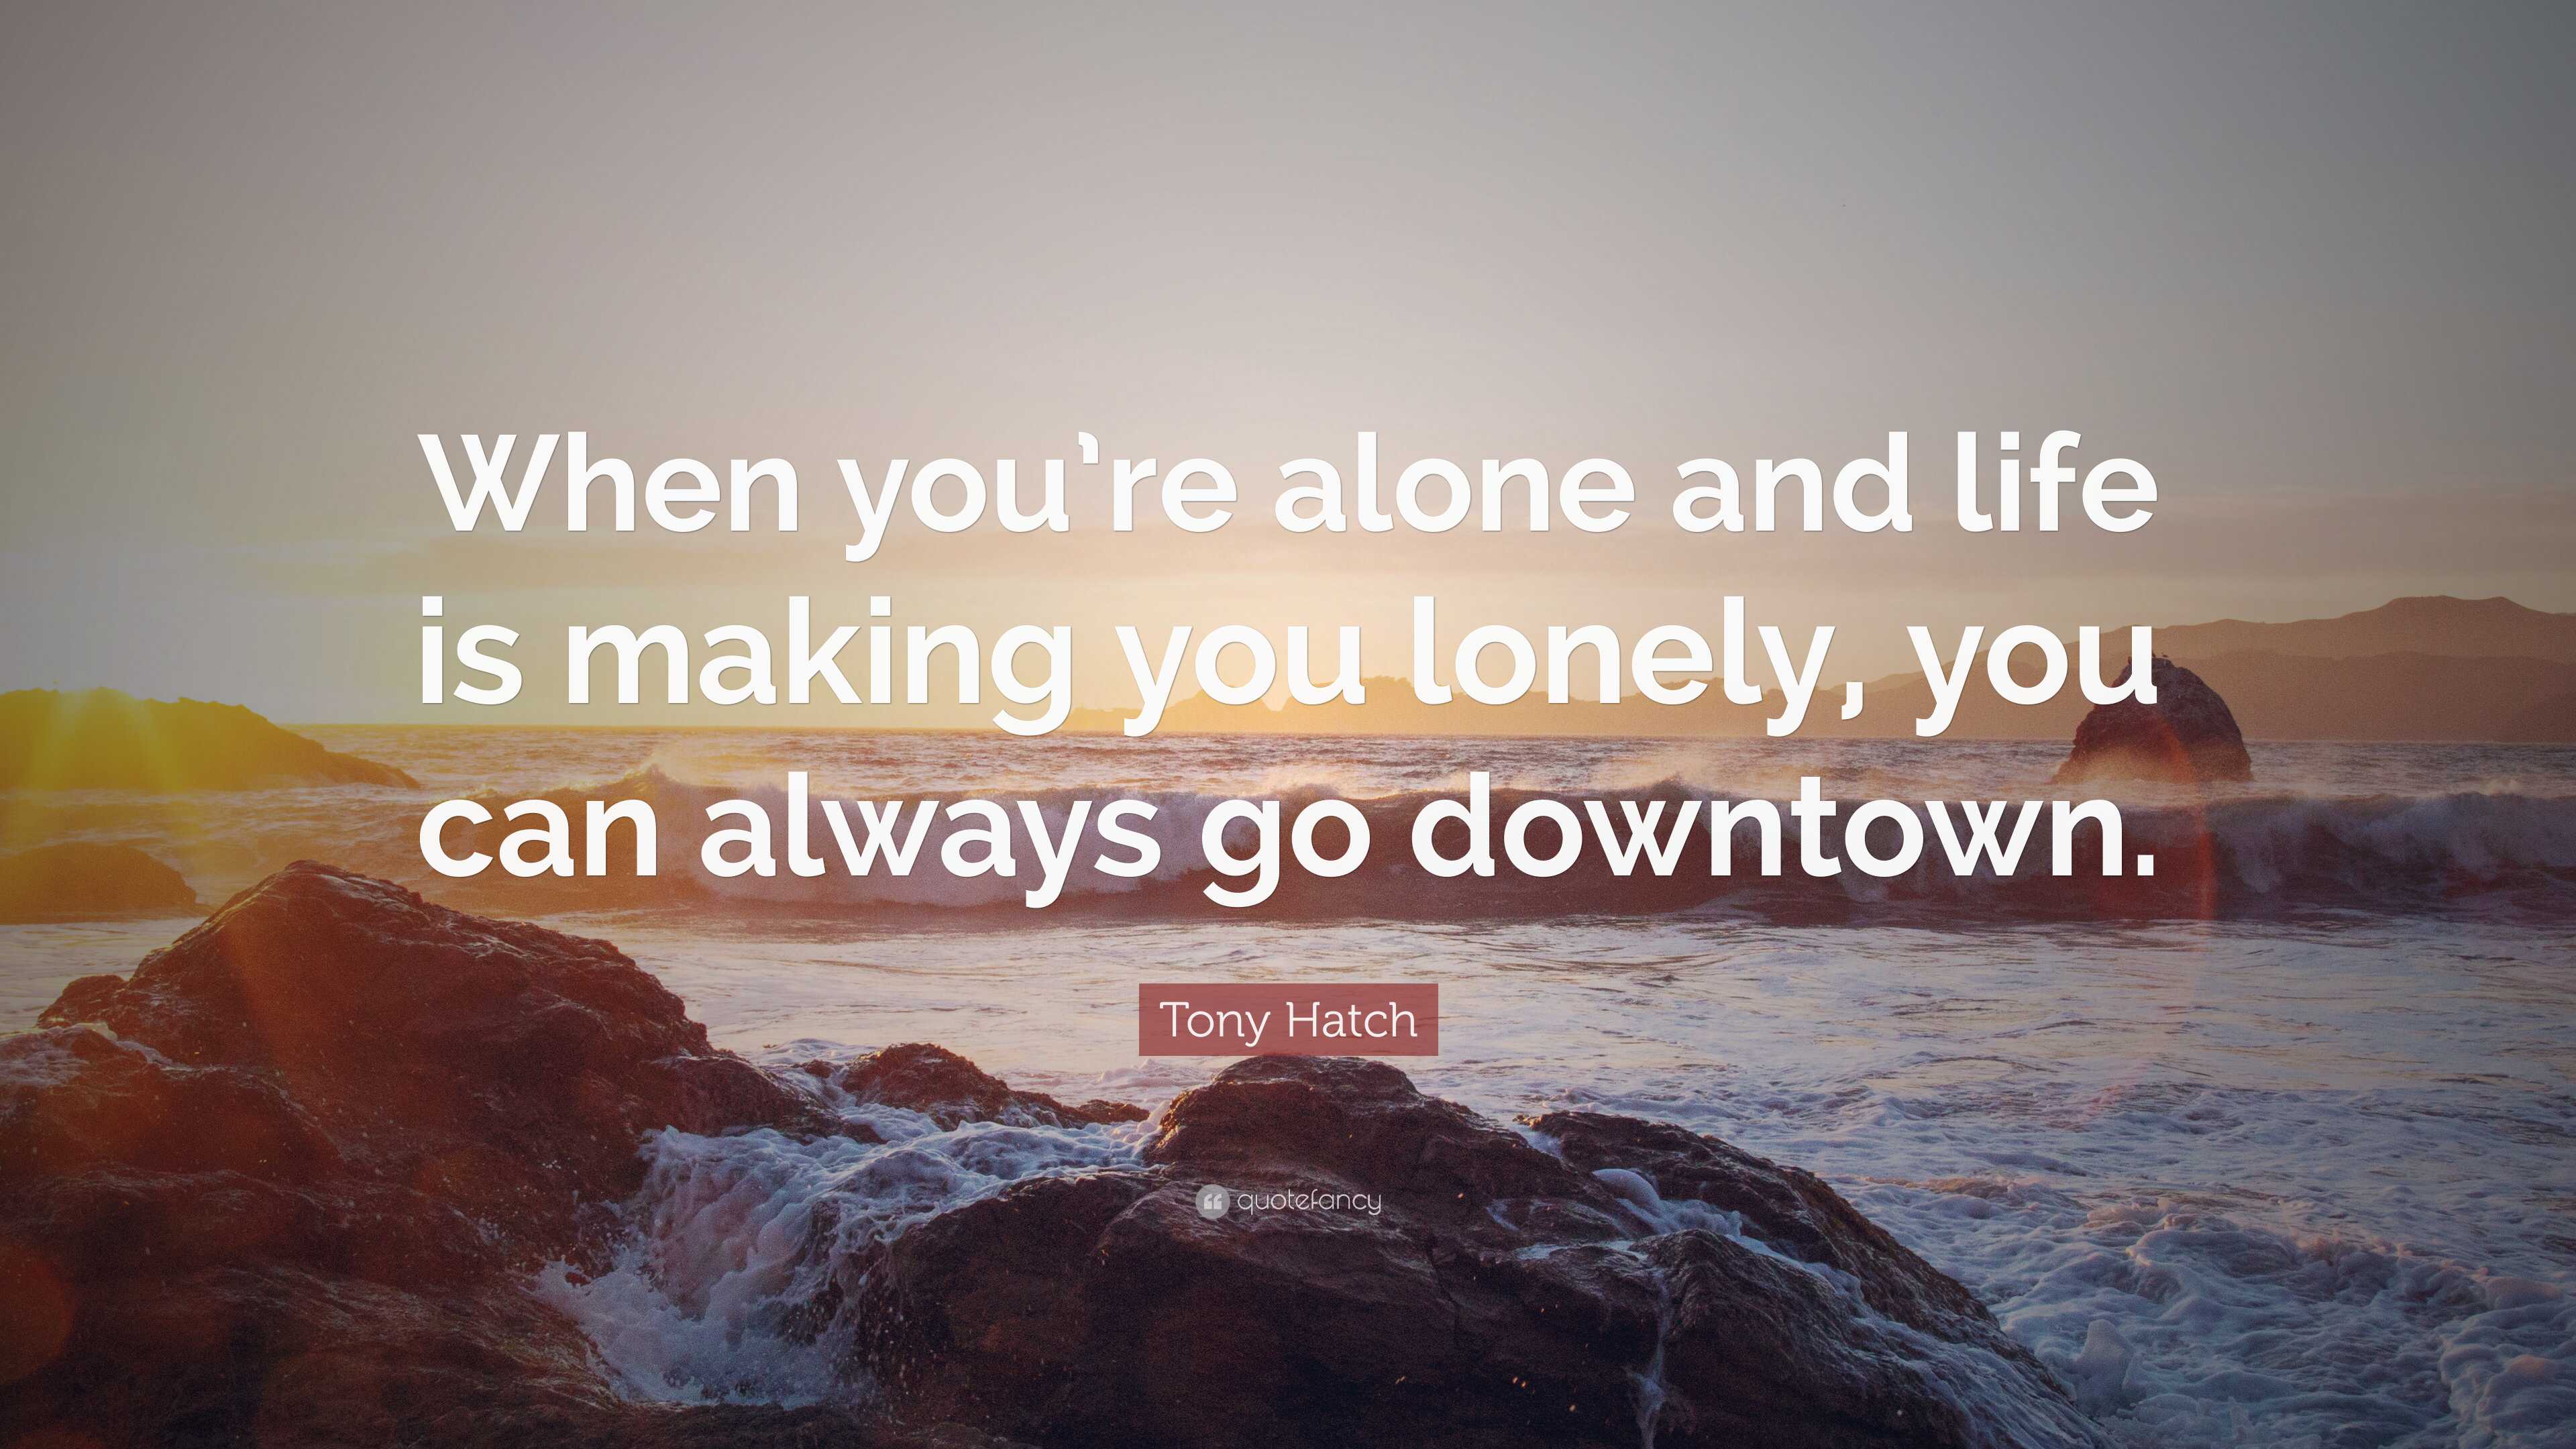 Tony Hatch Quote: “When you’re alone and life is making you lonely, you ...